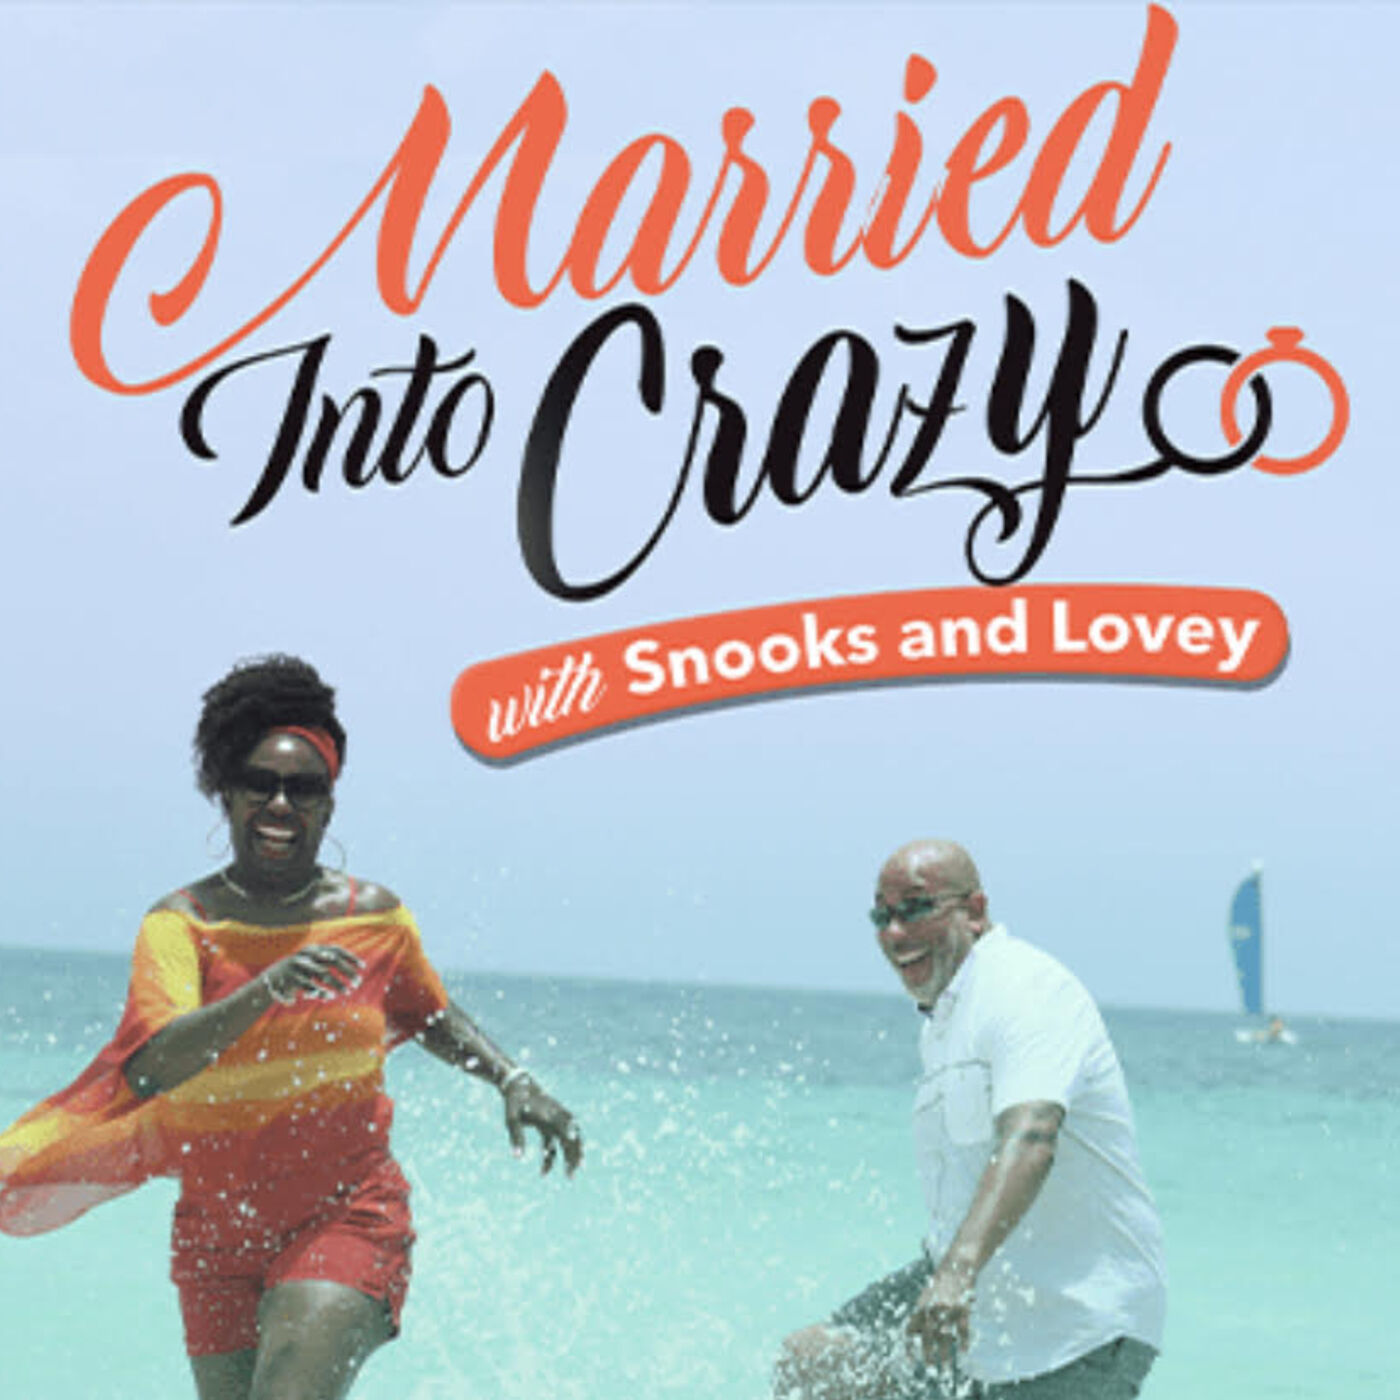 Not Losing Sight of Each Other - Married into Crazy - P1